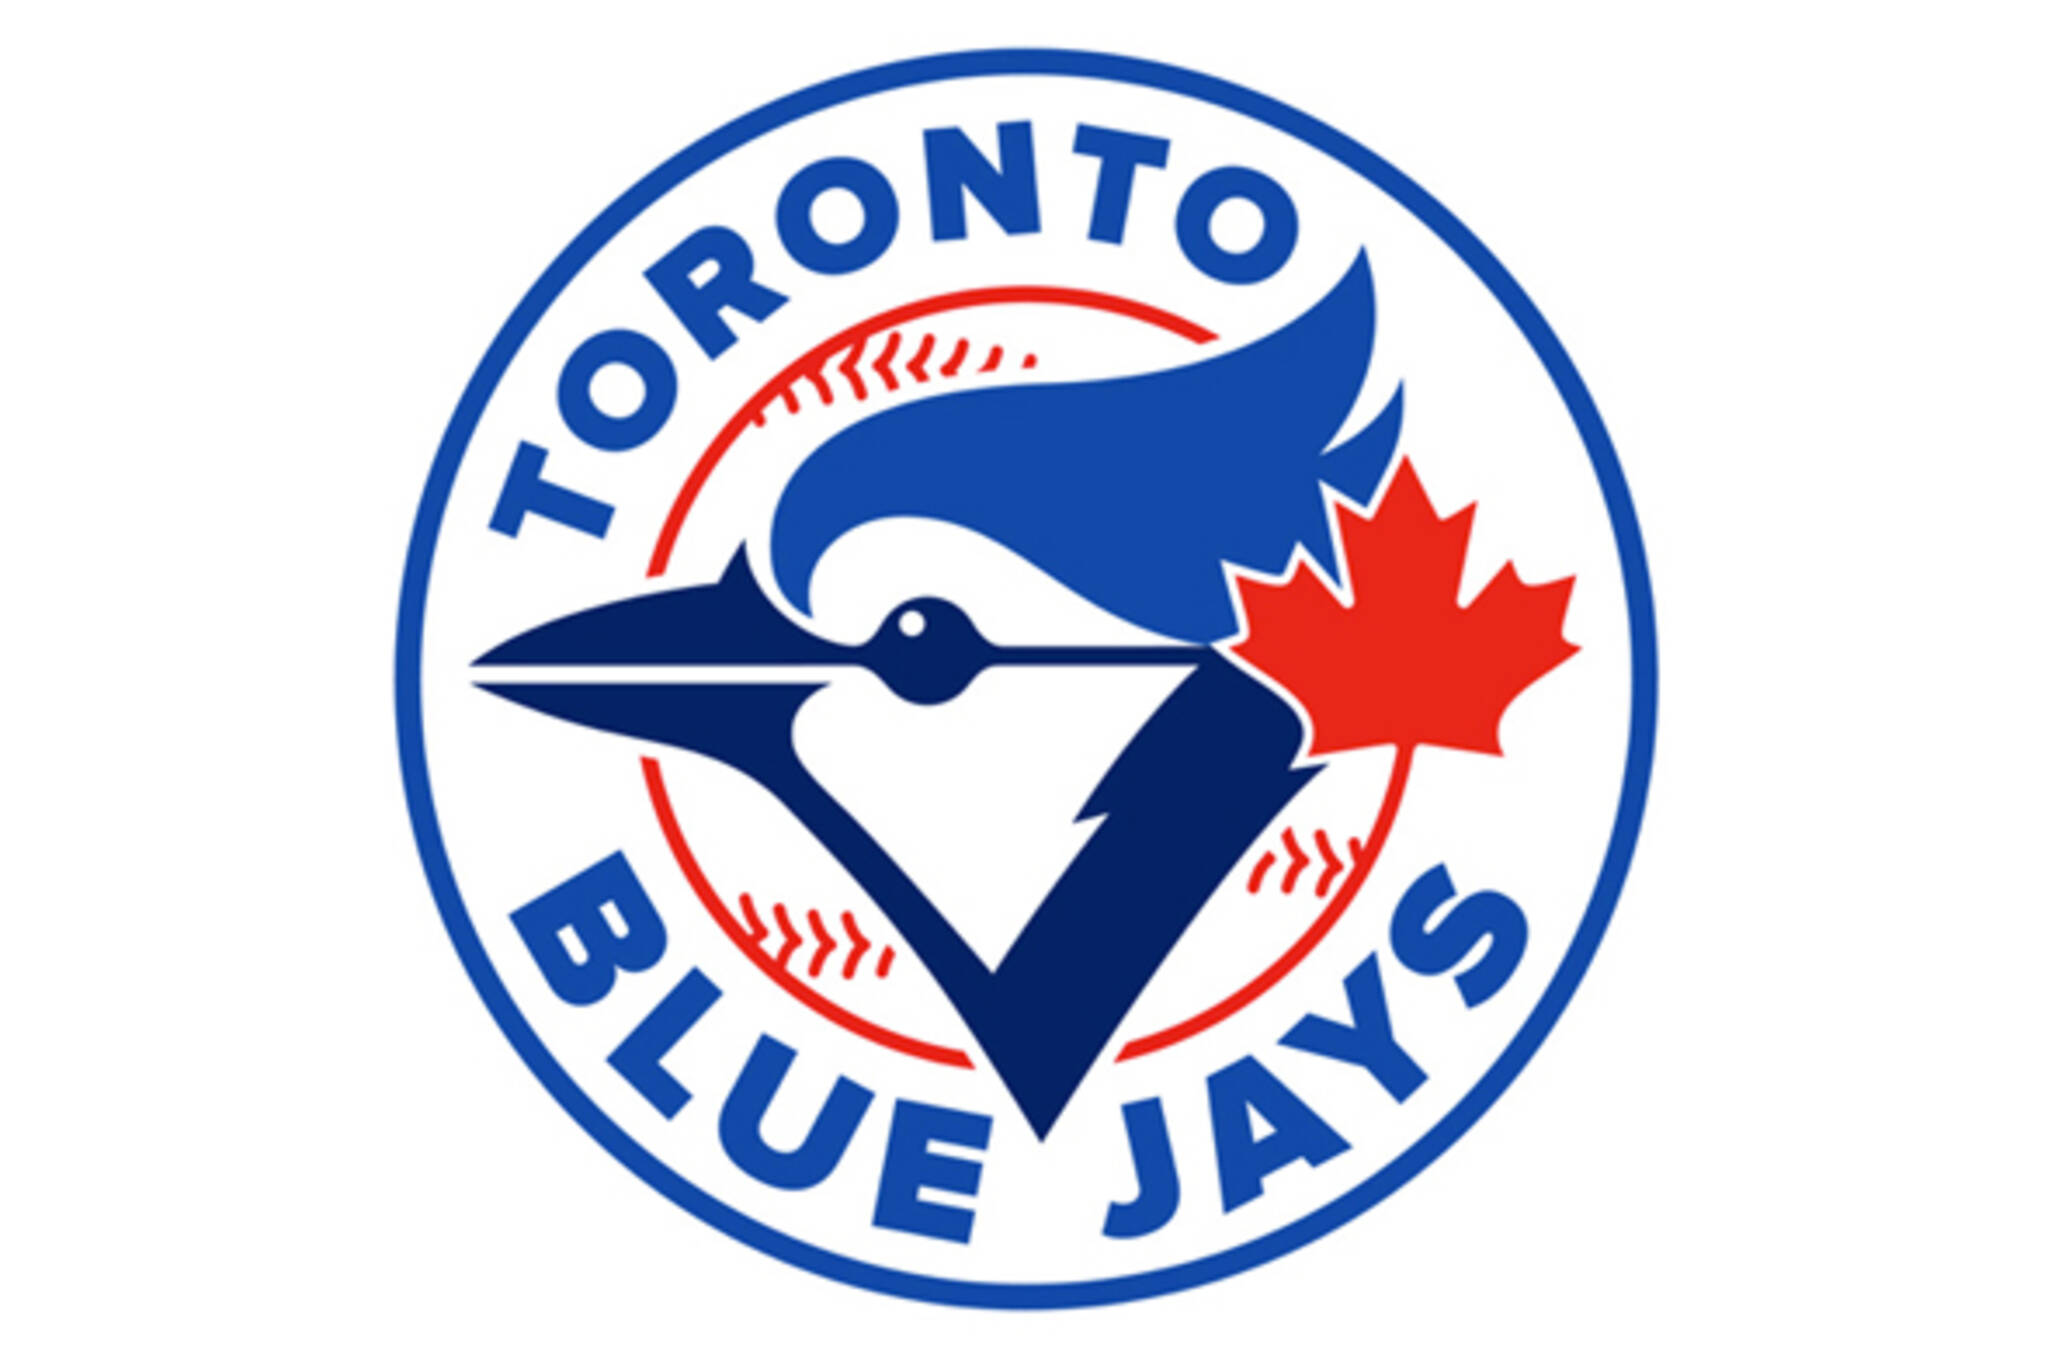 Is this an even better Toronto Blue Jays logo?